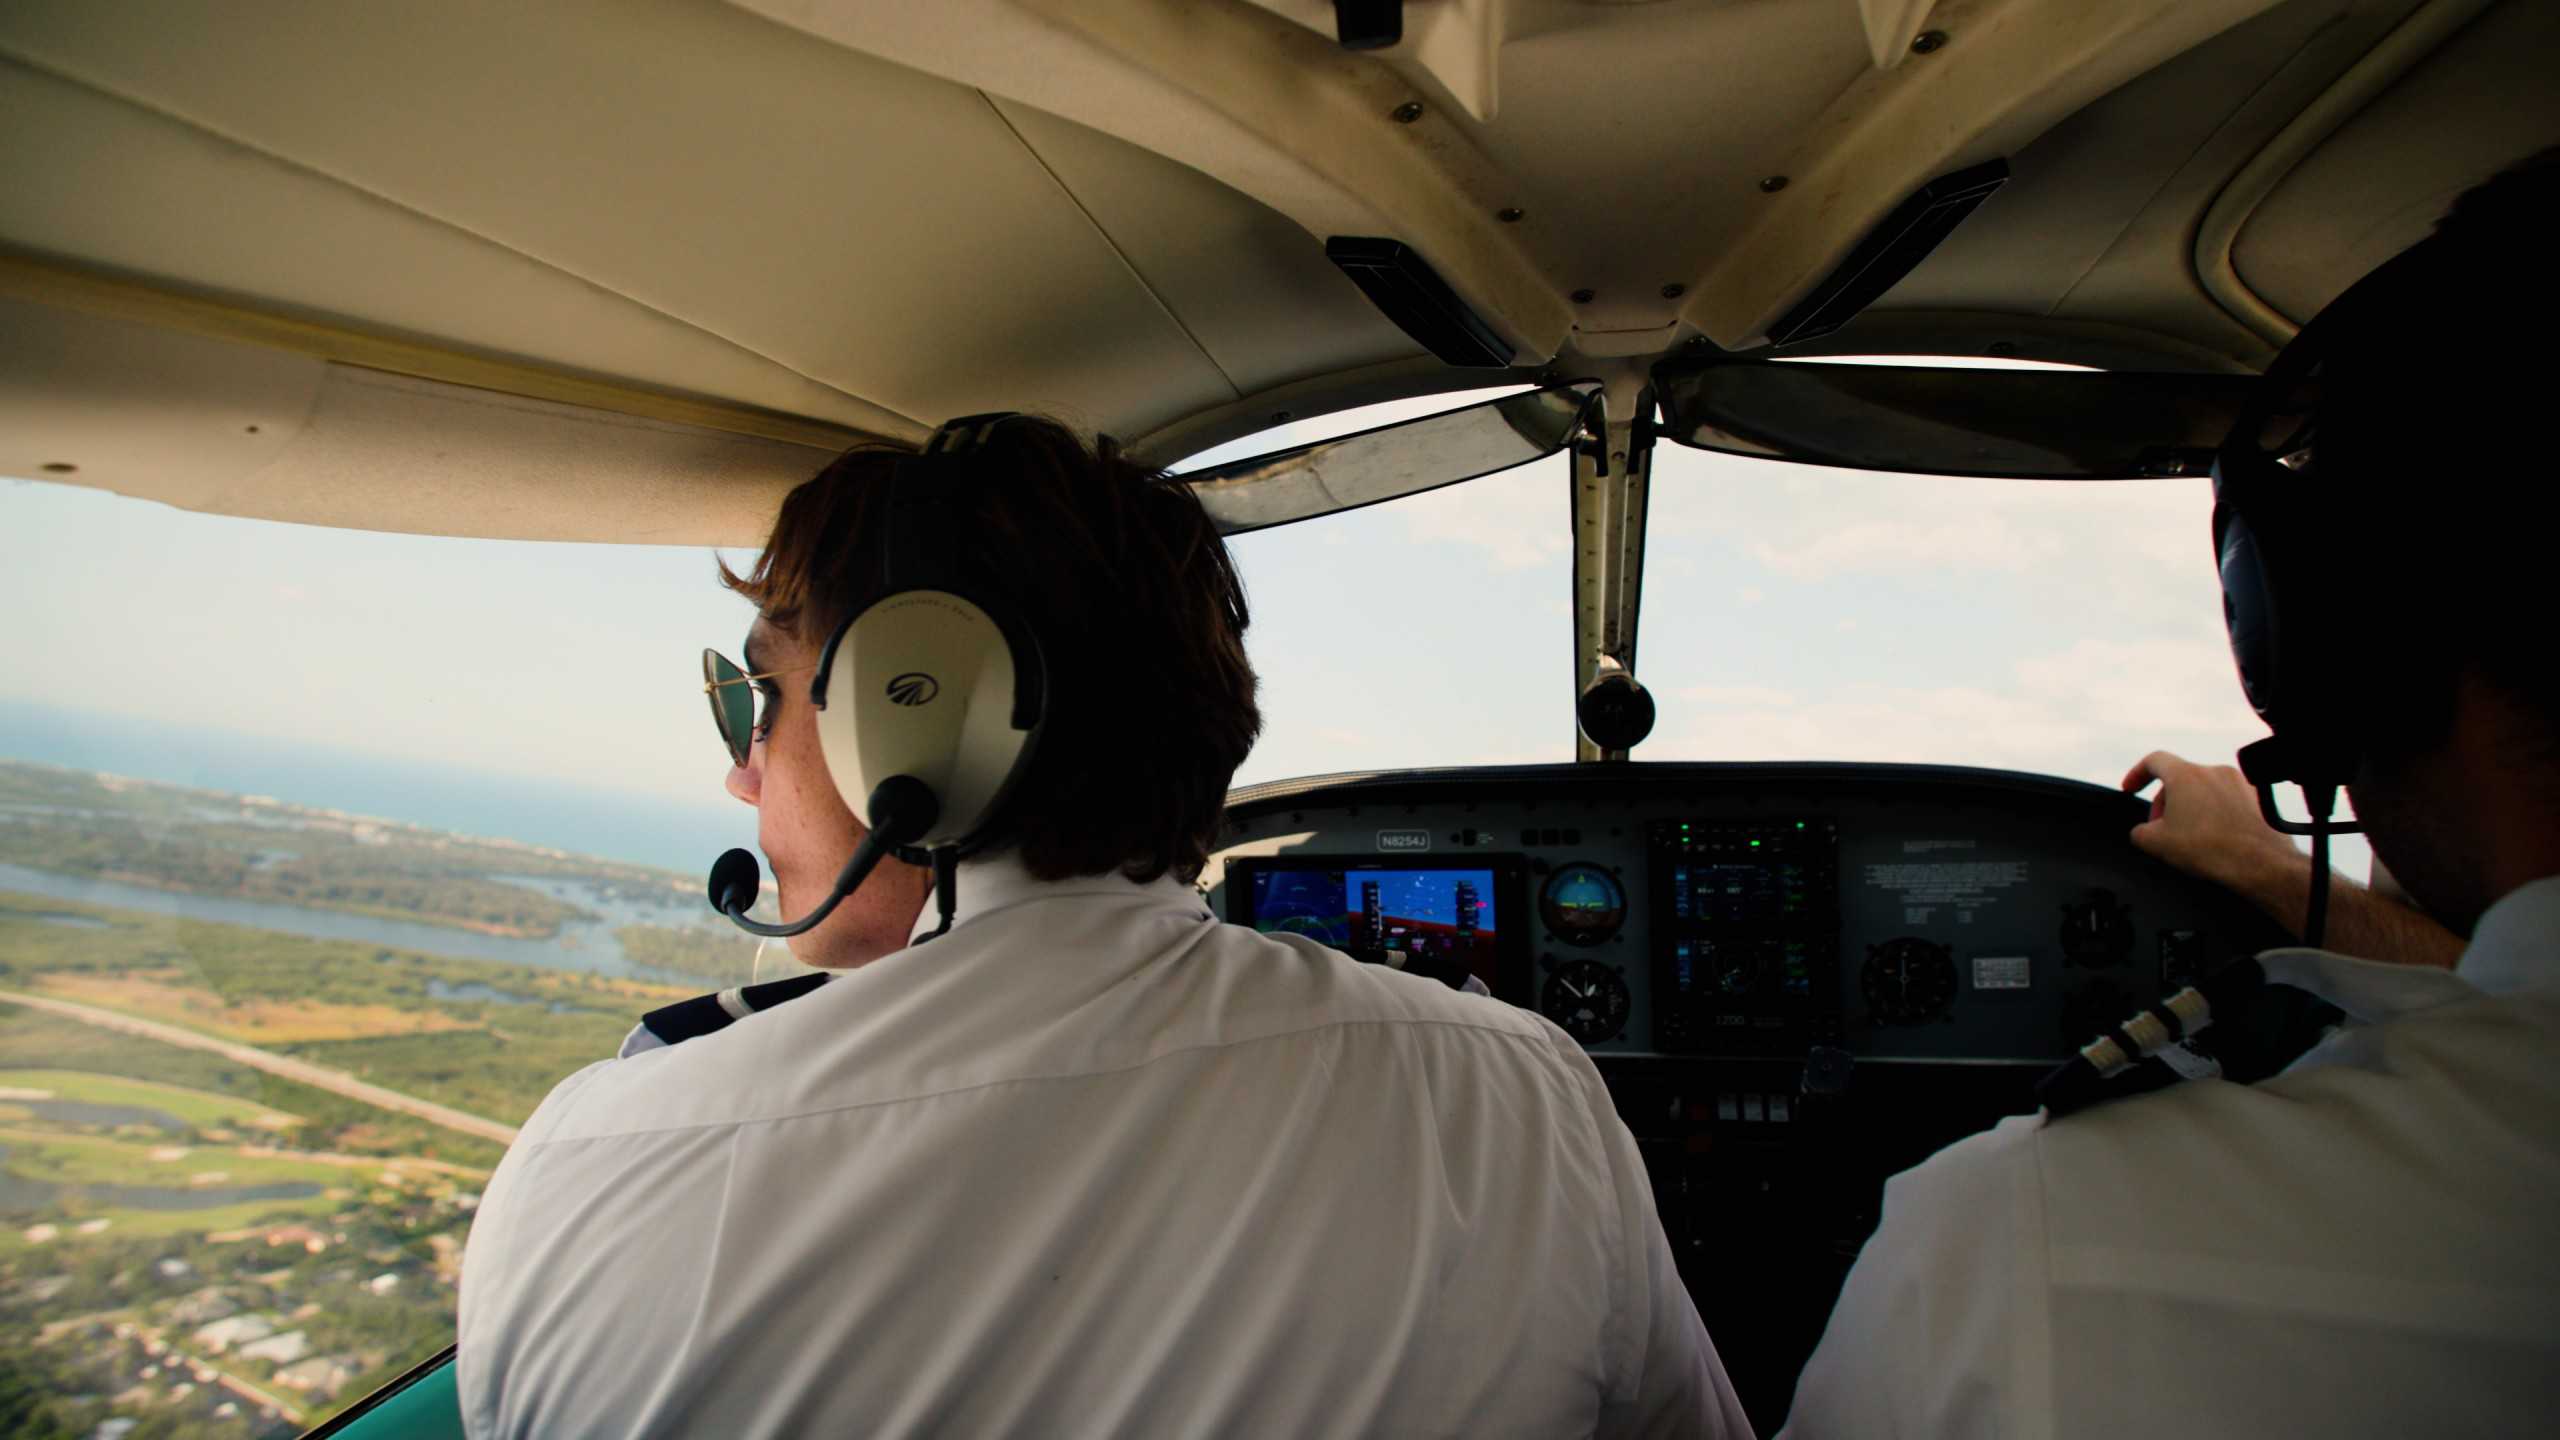 View from behind of a pilot and copilot in an airplane cockpit